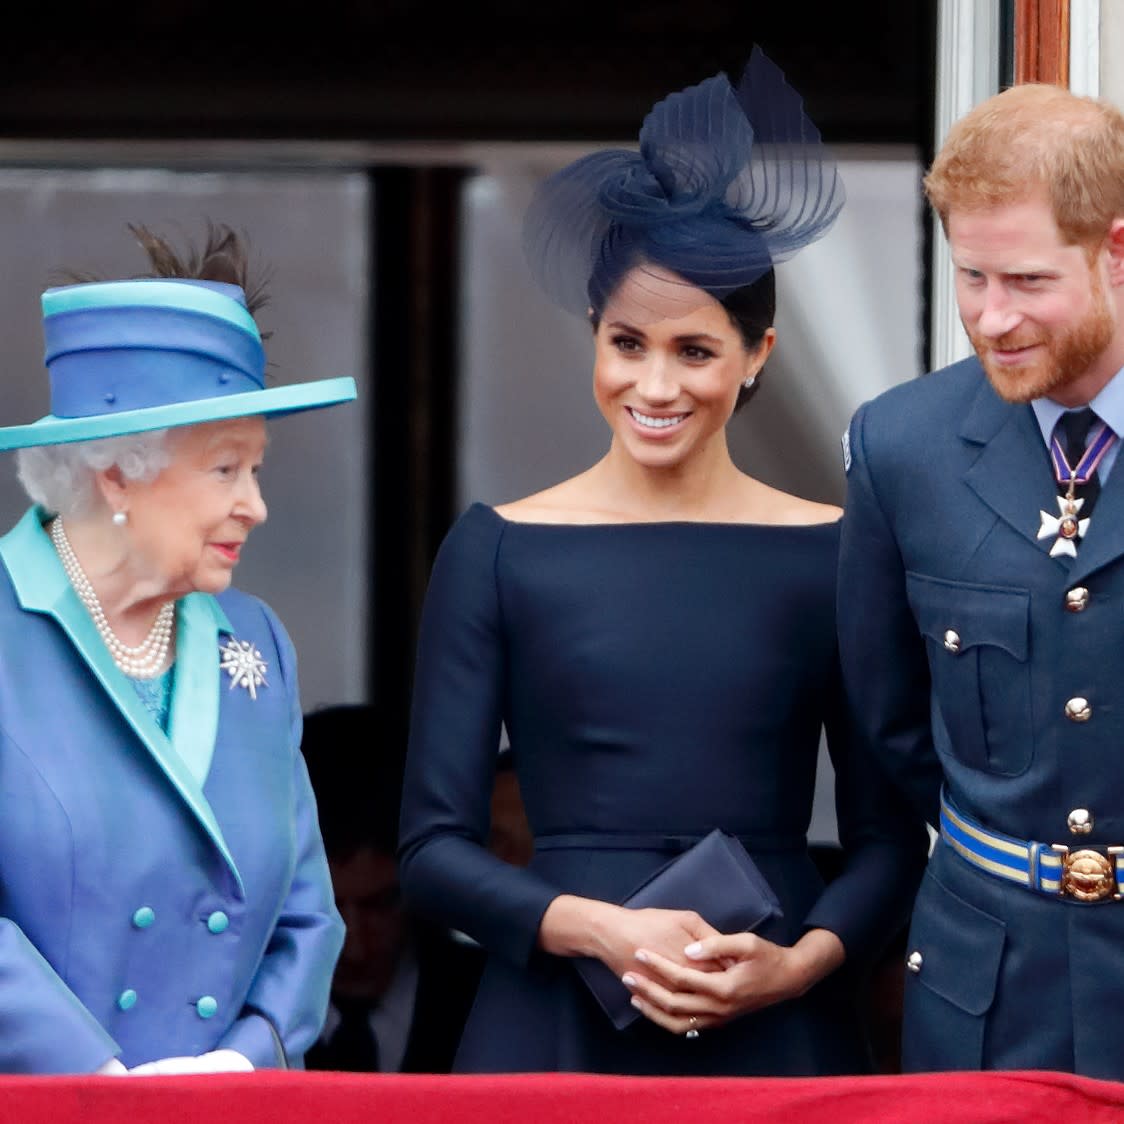  Queen Elizabeth, Prince Harry, and Meghan Markle at Trooping the Colour. 